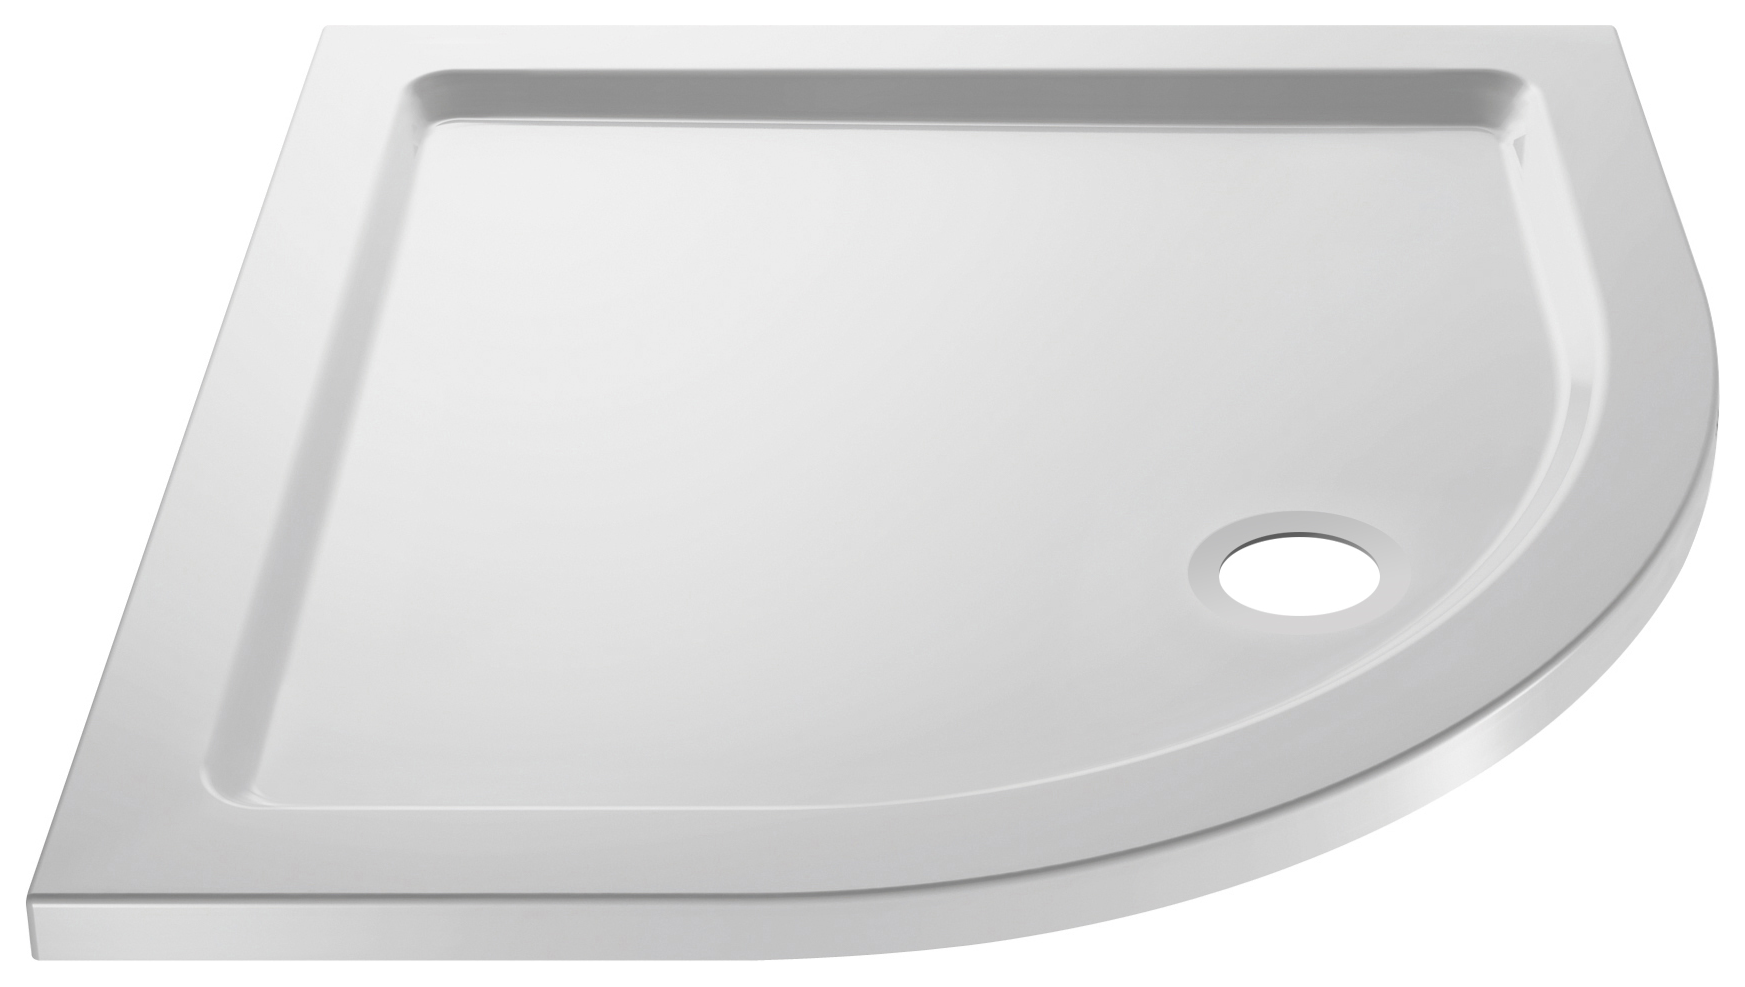 Image of Wickes 40mm Pearlstone Quadrant Shower Tray - 900mm